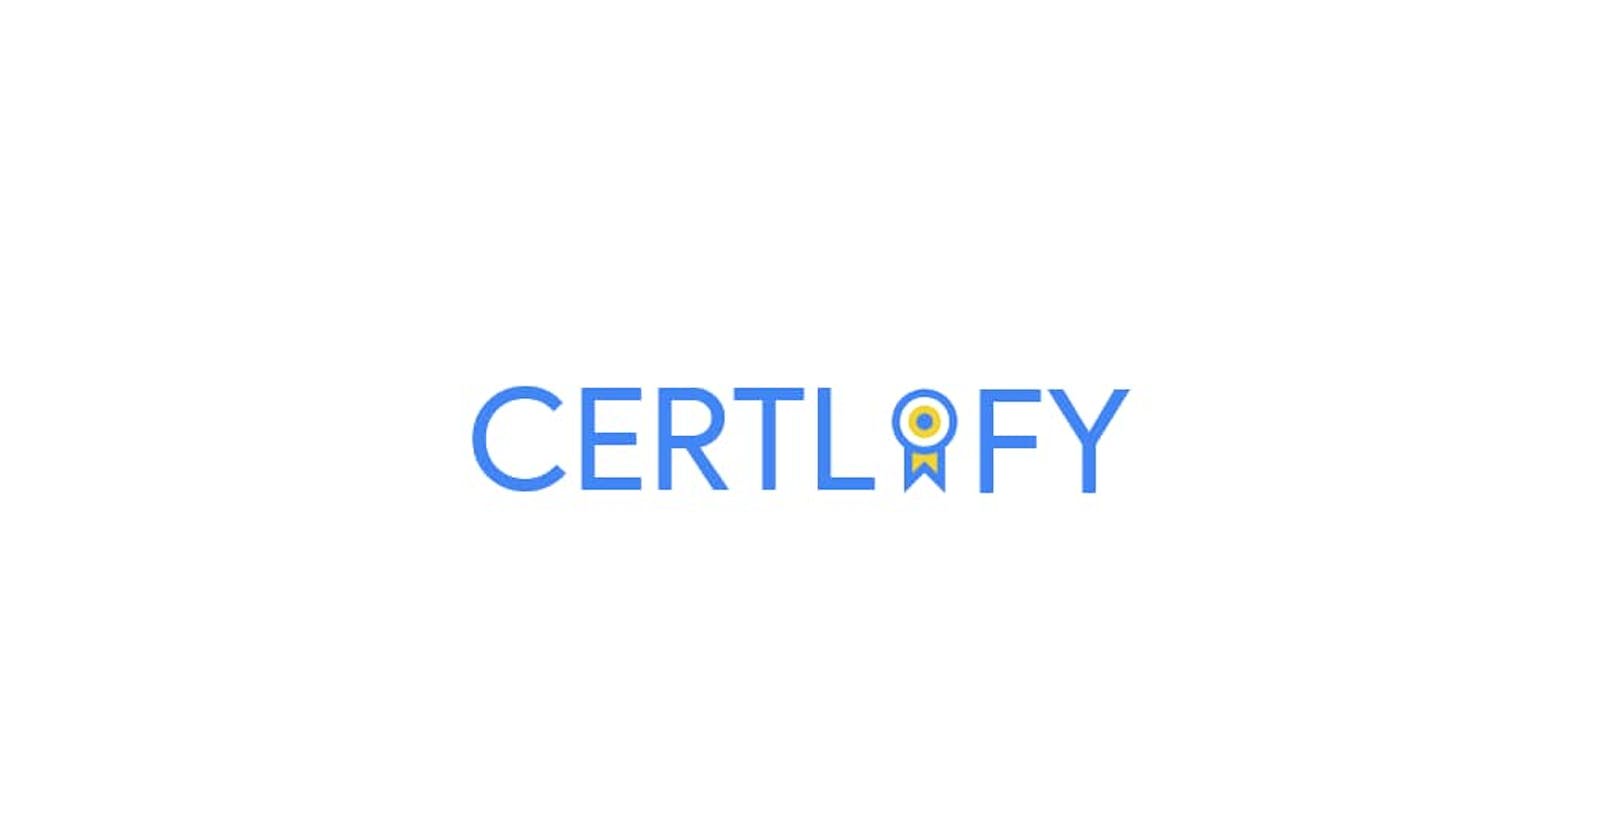 Certlify: The Story